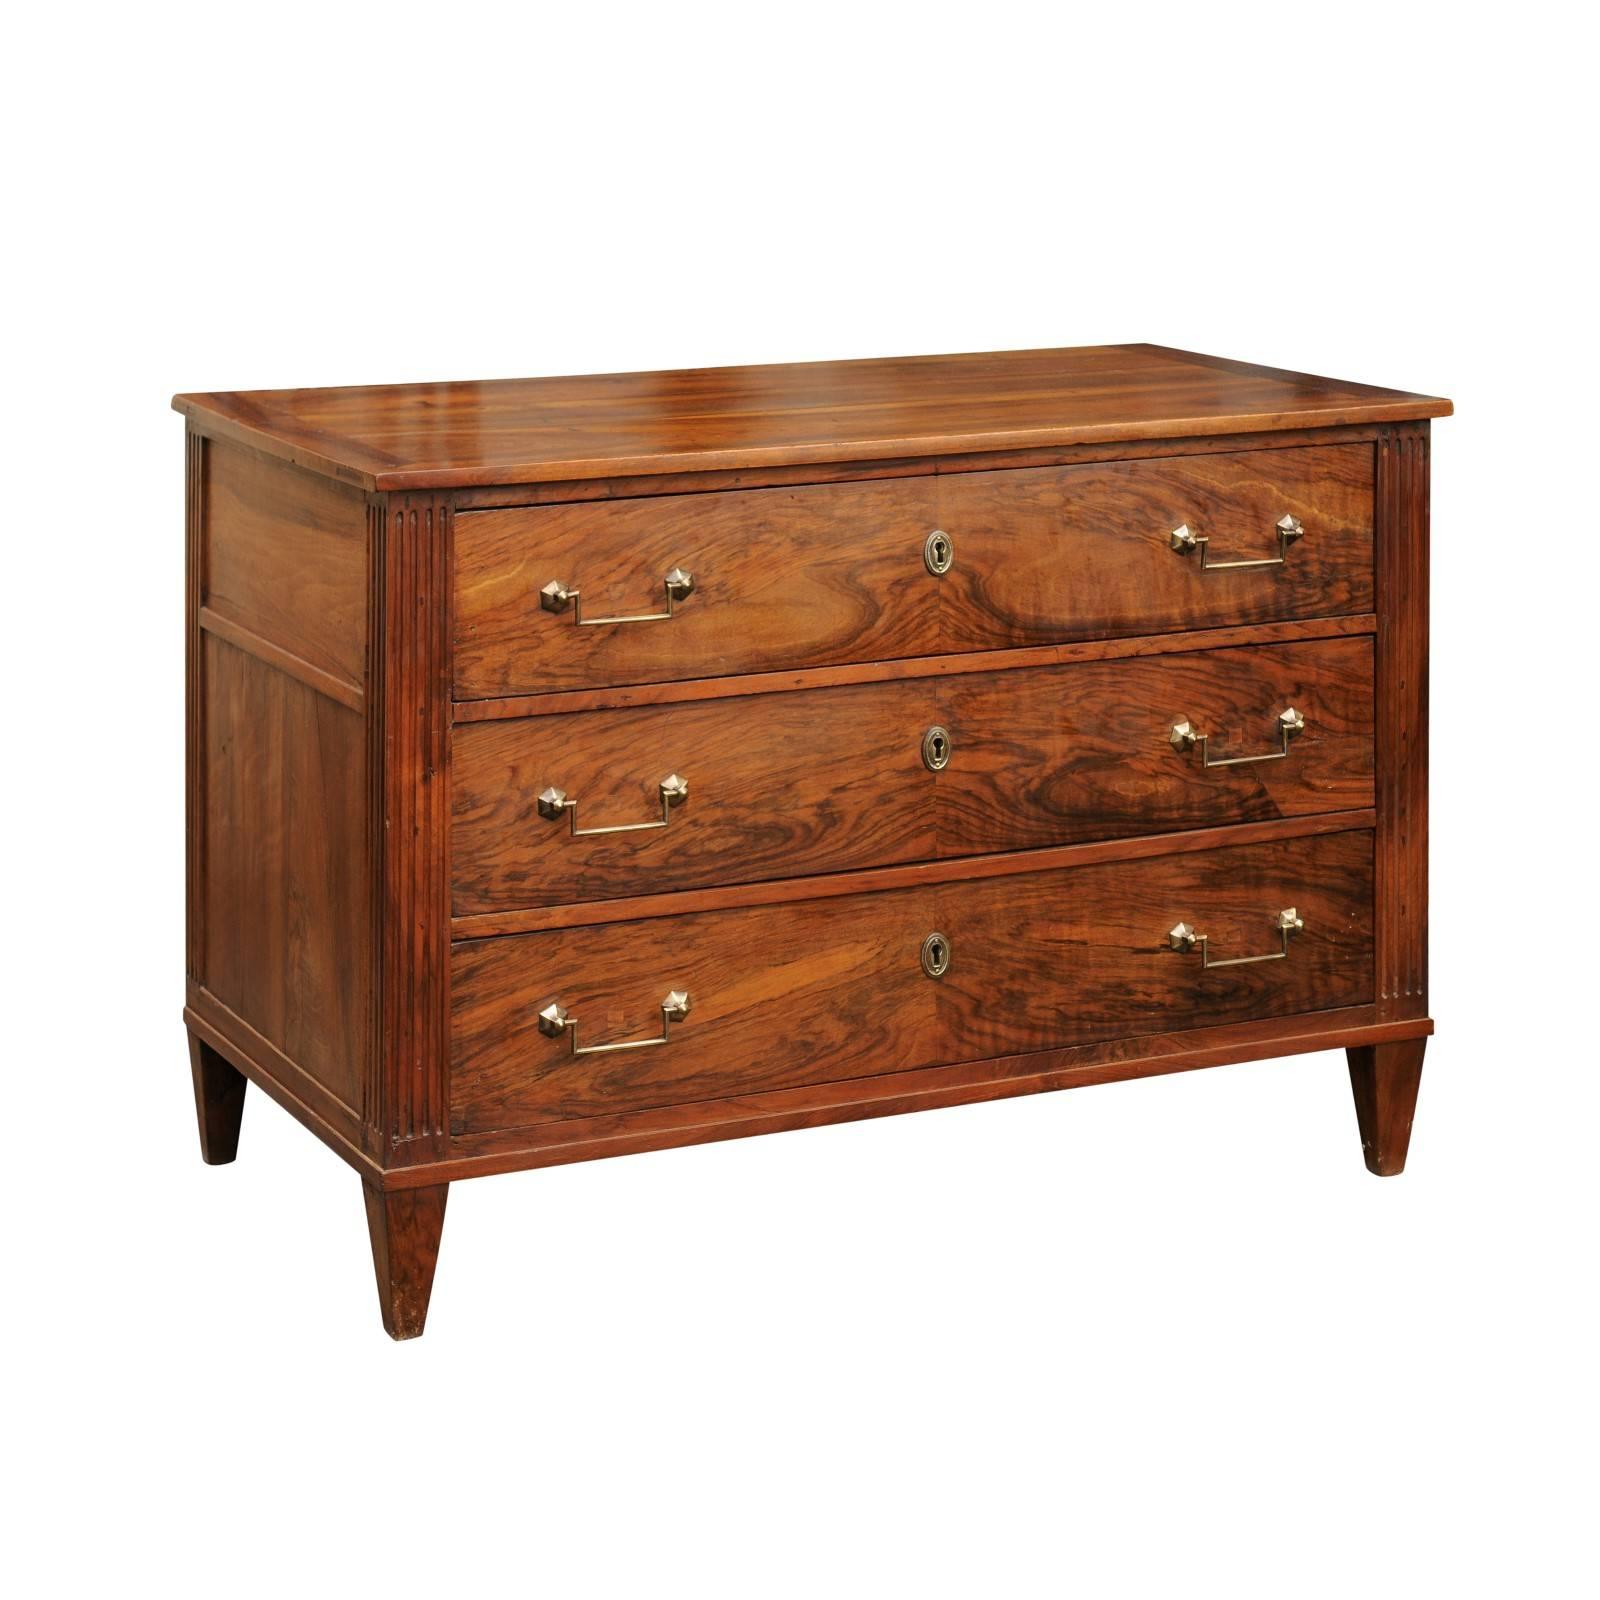 French Directoire Style 1840s Walnut Bookmarked Veneer Three-Drawer Commode